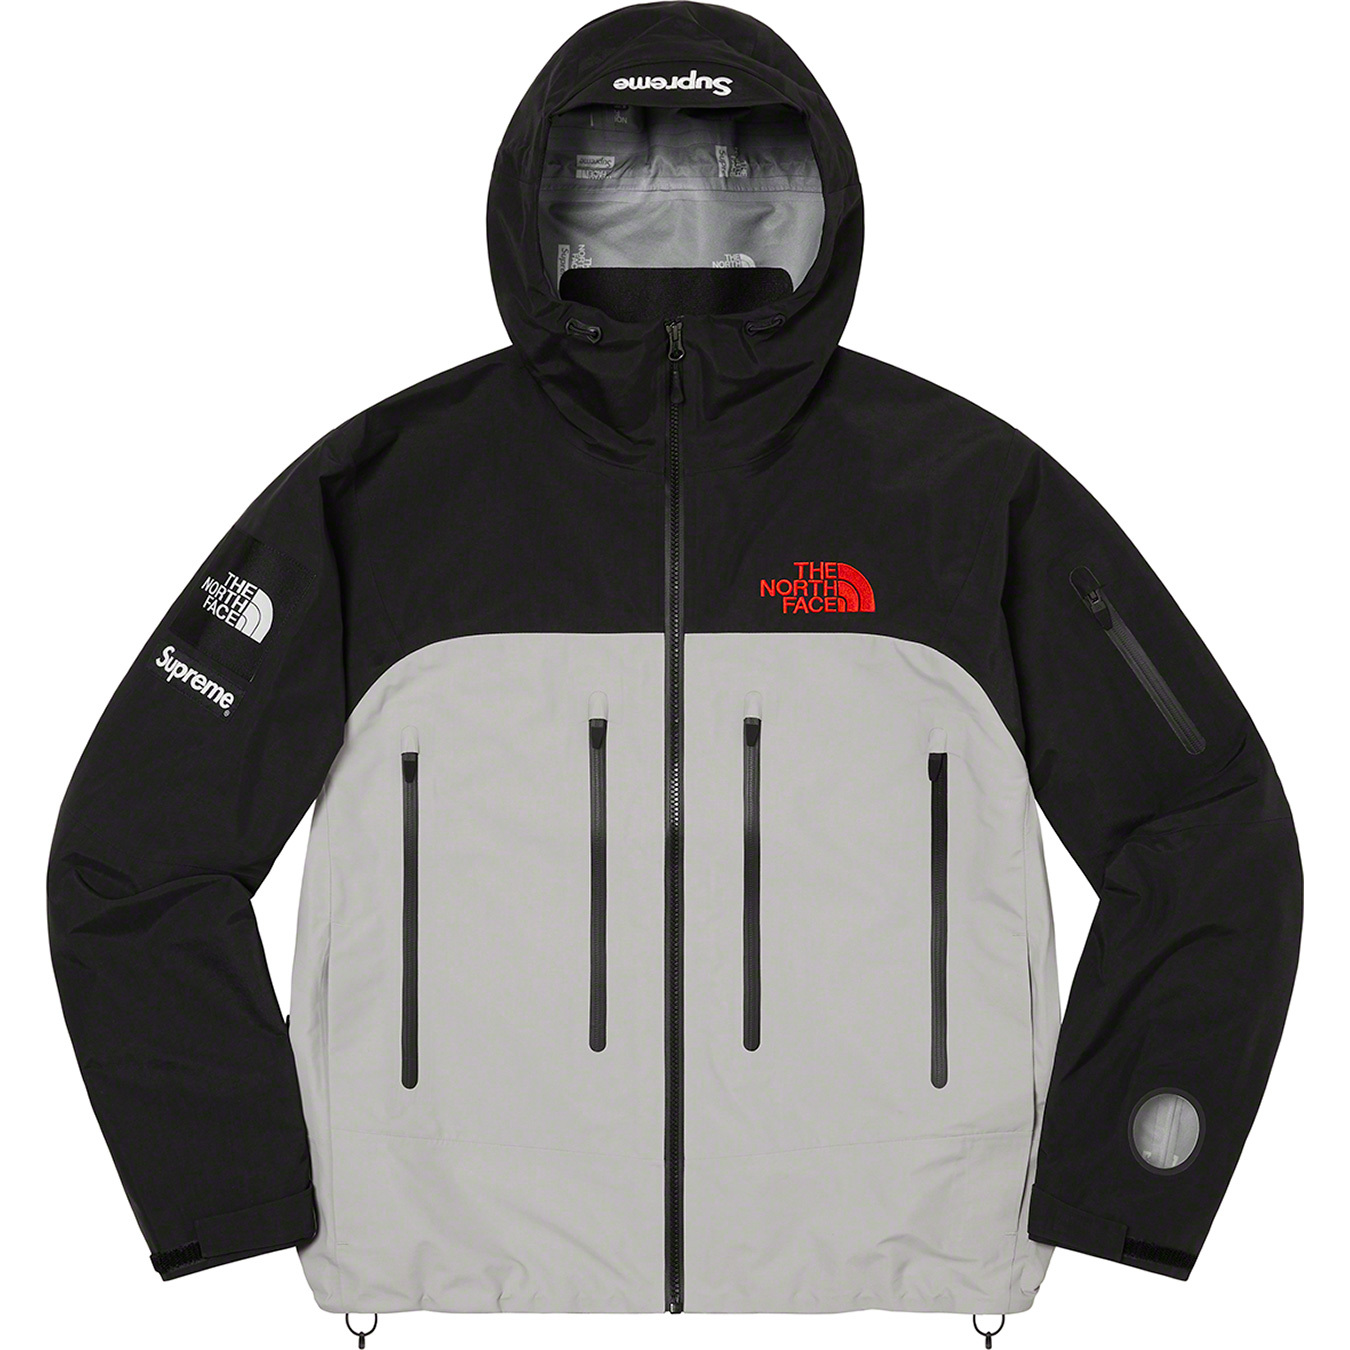 The north face 2007 outside taped seams hyvent shell jacket (L